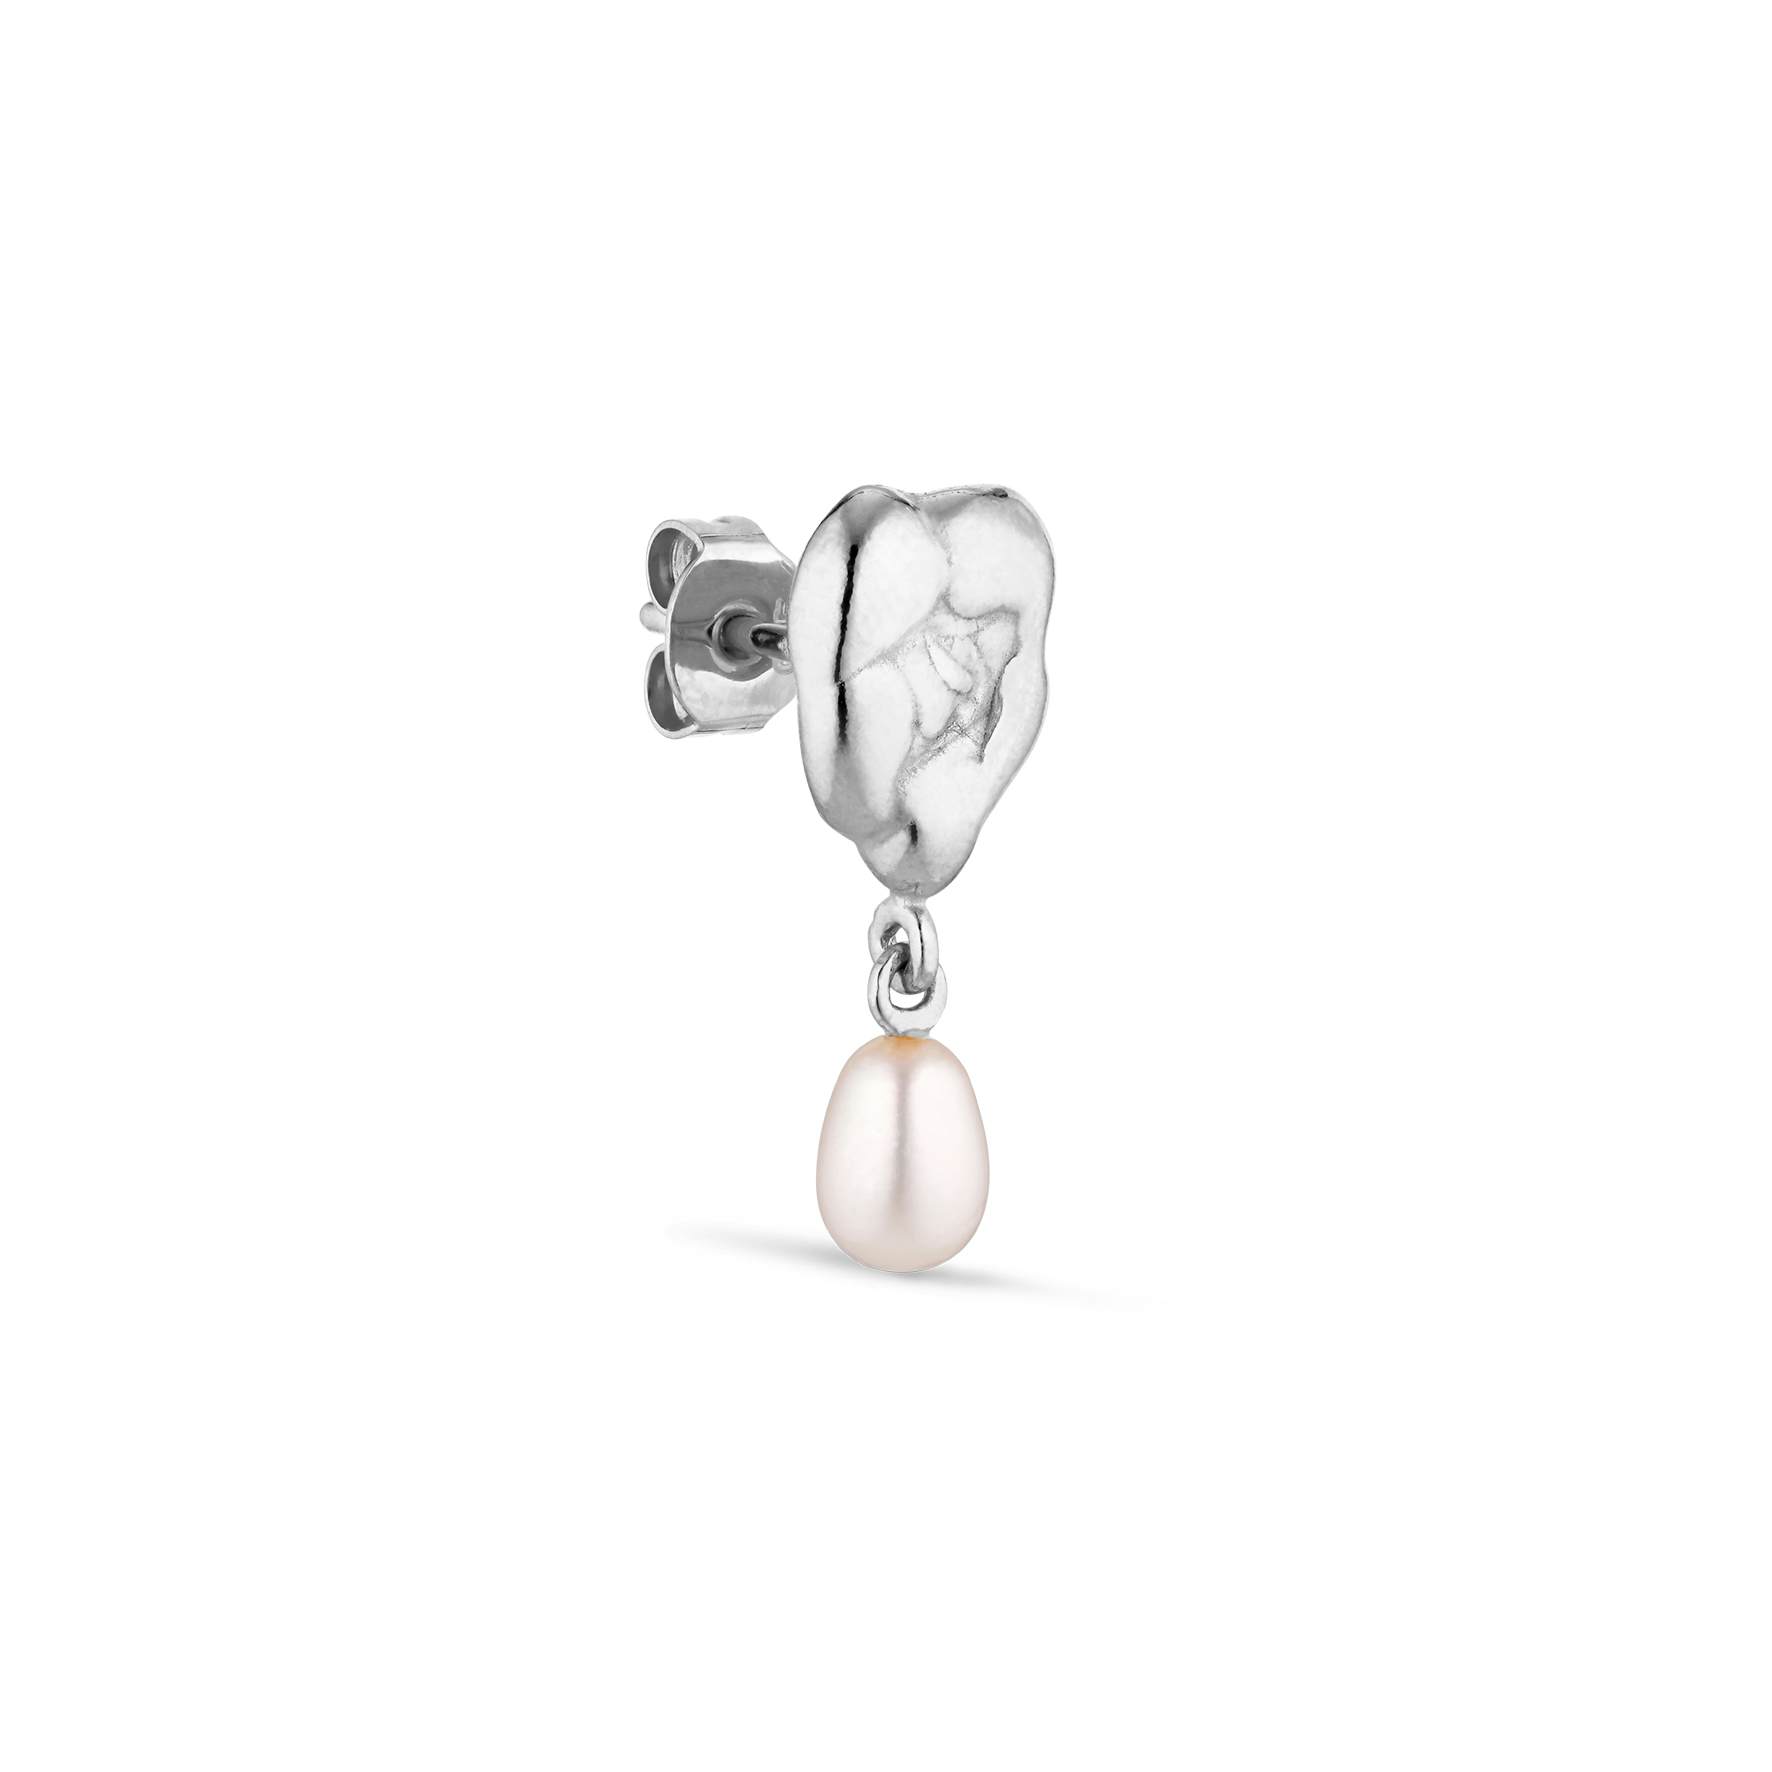 Drippy Earstud With Pearl Pendant from Jane Kønig in Silver Sterling 925